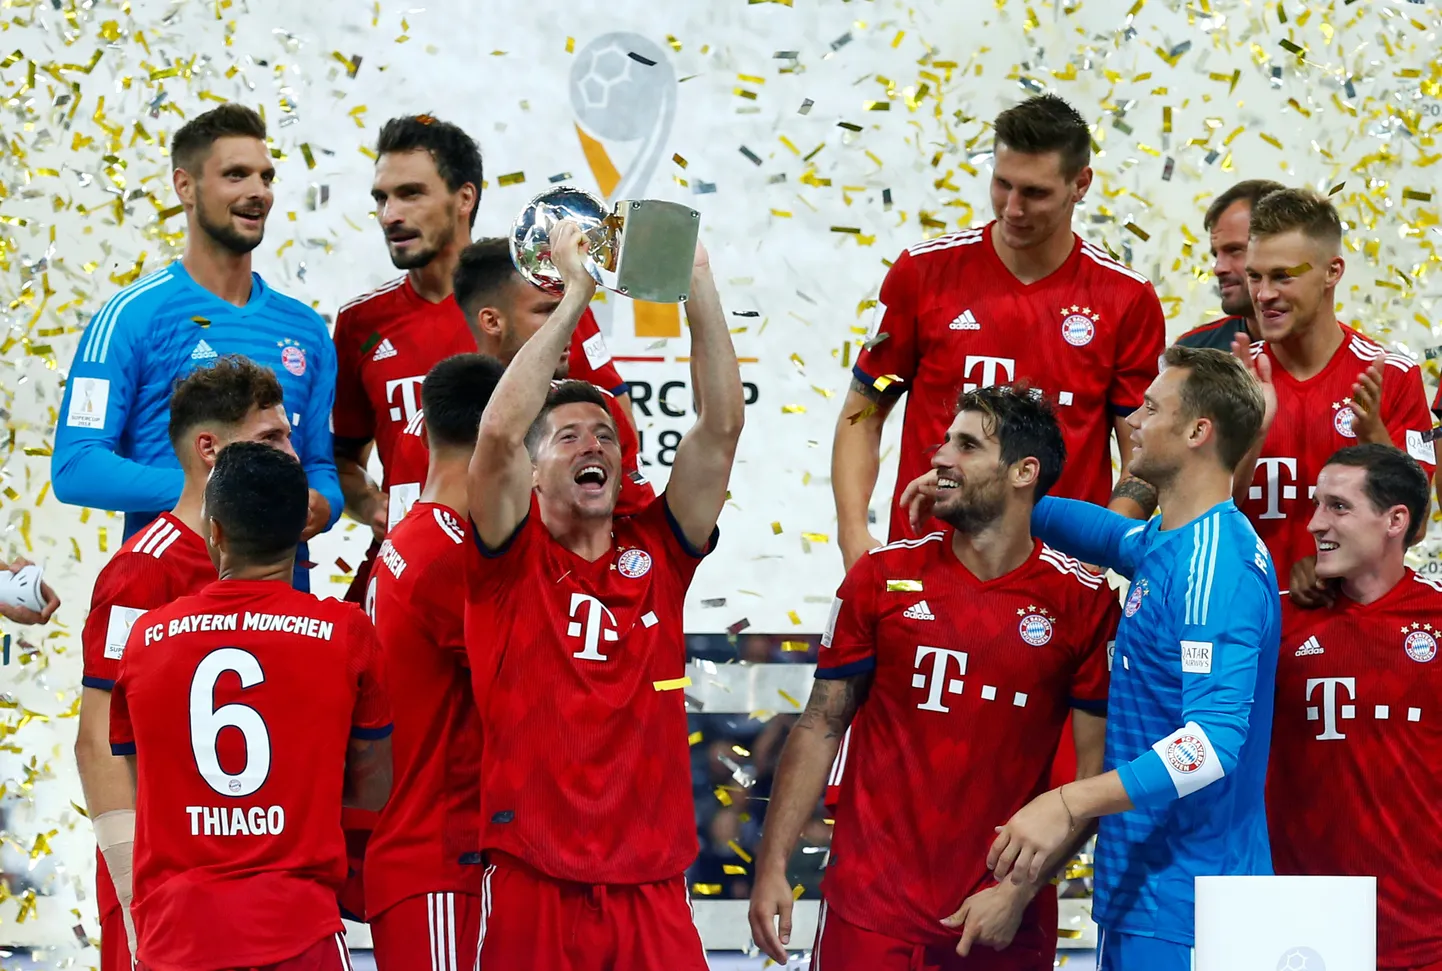 Soccer Football - German Super Cup - Eintracht Frankfurt v Bayern Munich - Commerzbank-Arena, Frankfurt, Germany - August 12, 2018   Bayern Munich's Robert Lewandowski celebrates winning the German Super Cup with the trophy   REUTERS/Ralph Orlowski    DFL regulations prohibit any use of photographs as image sequences and/or quasi-video